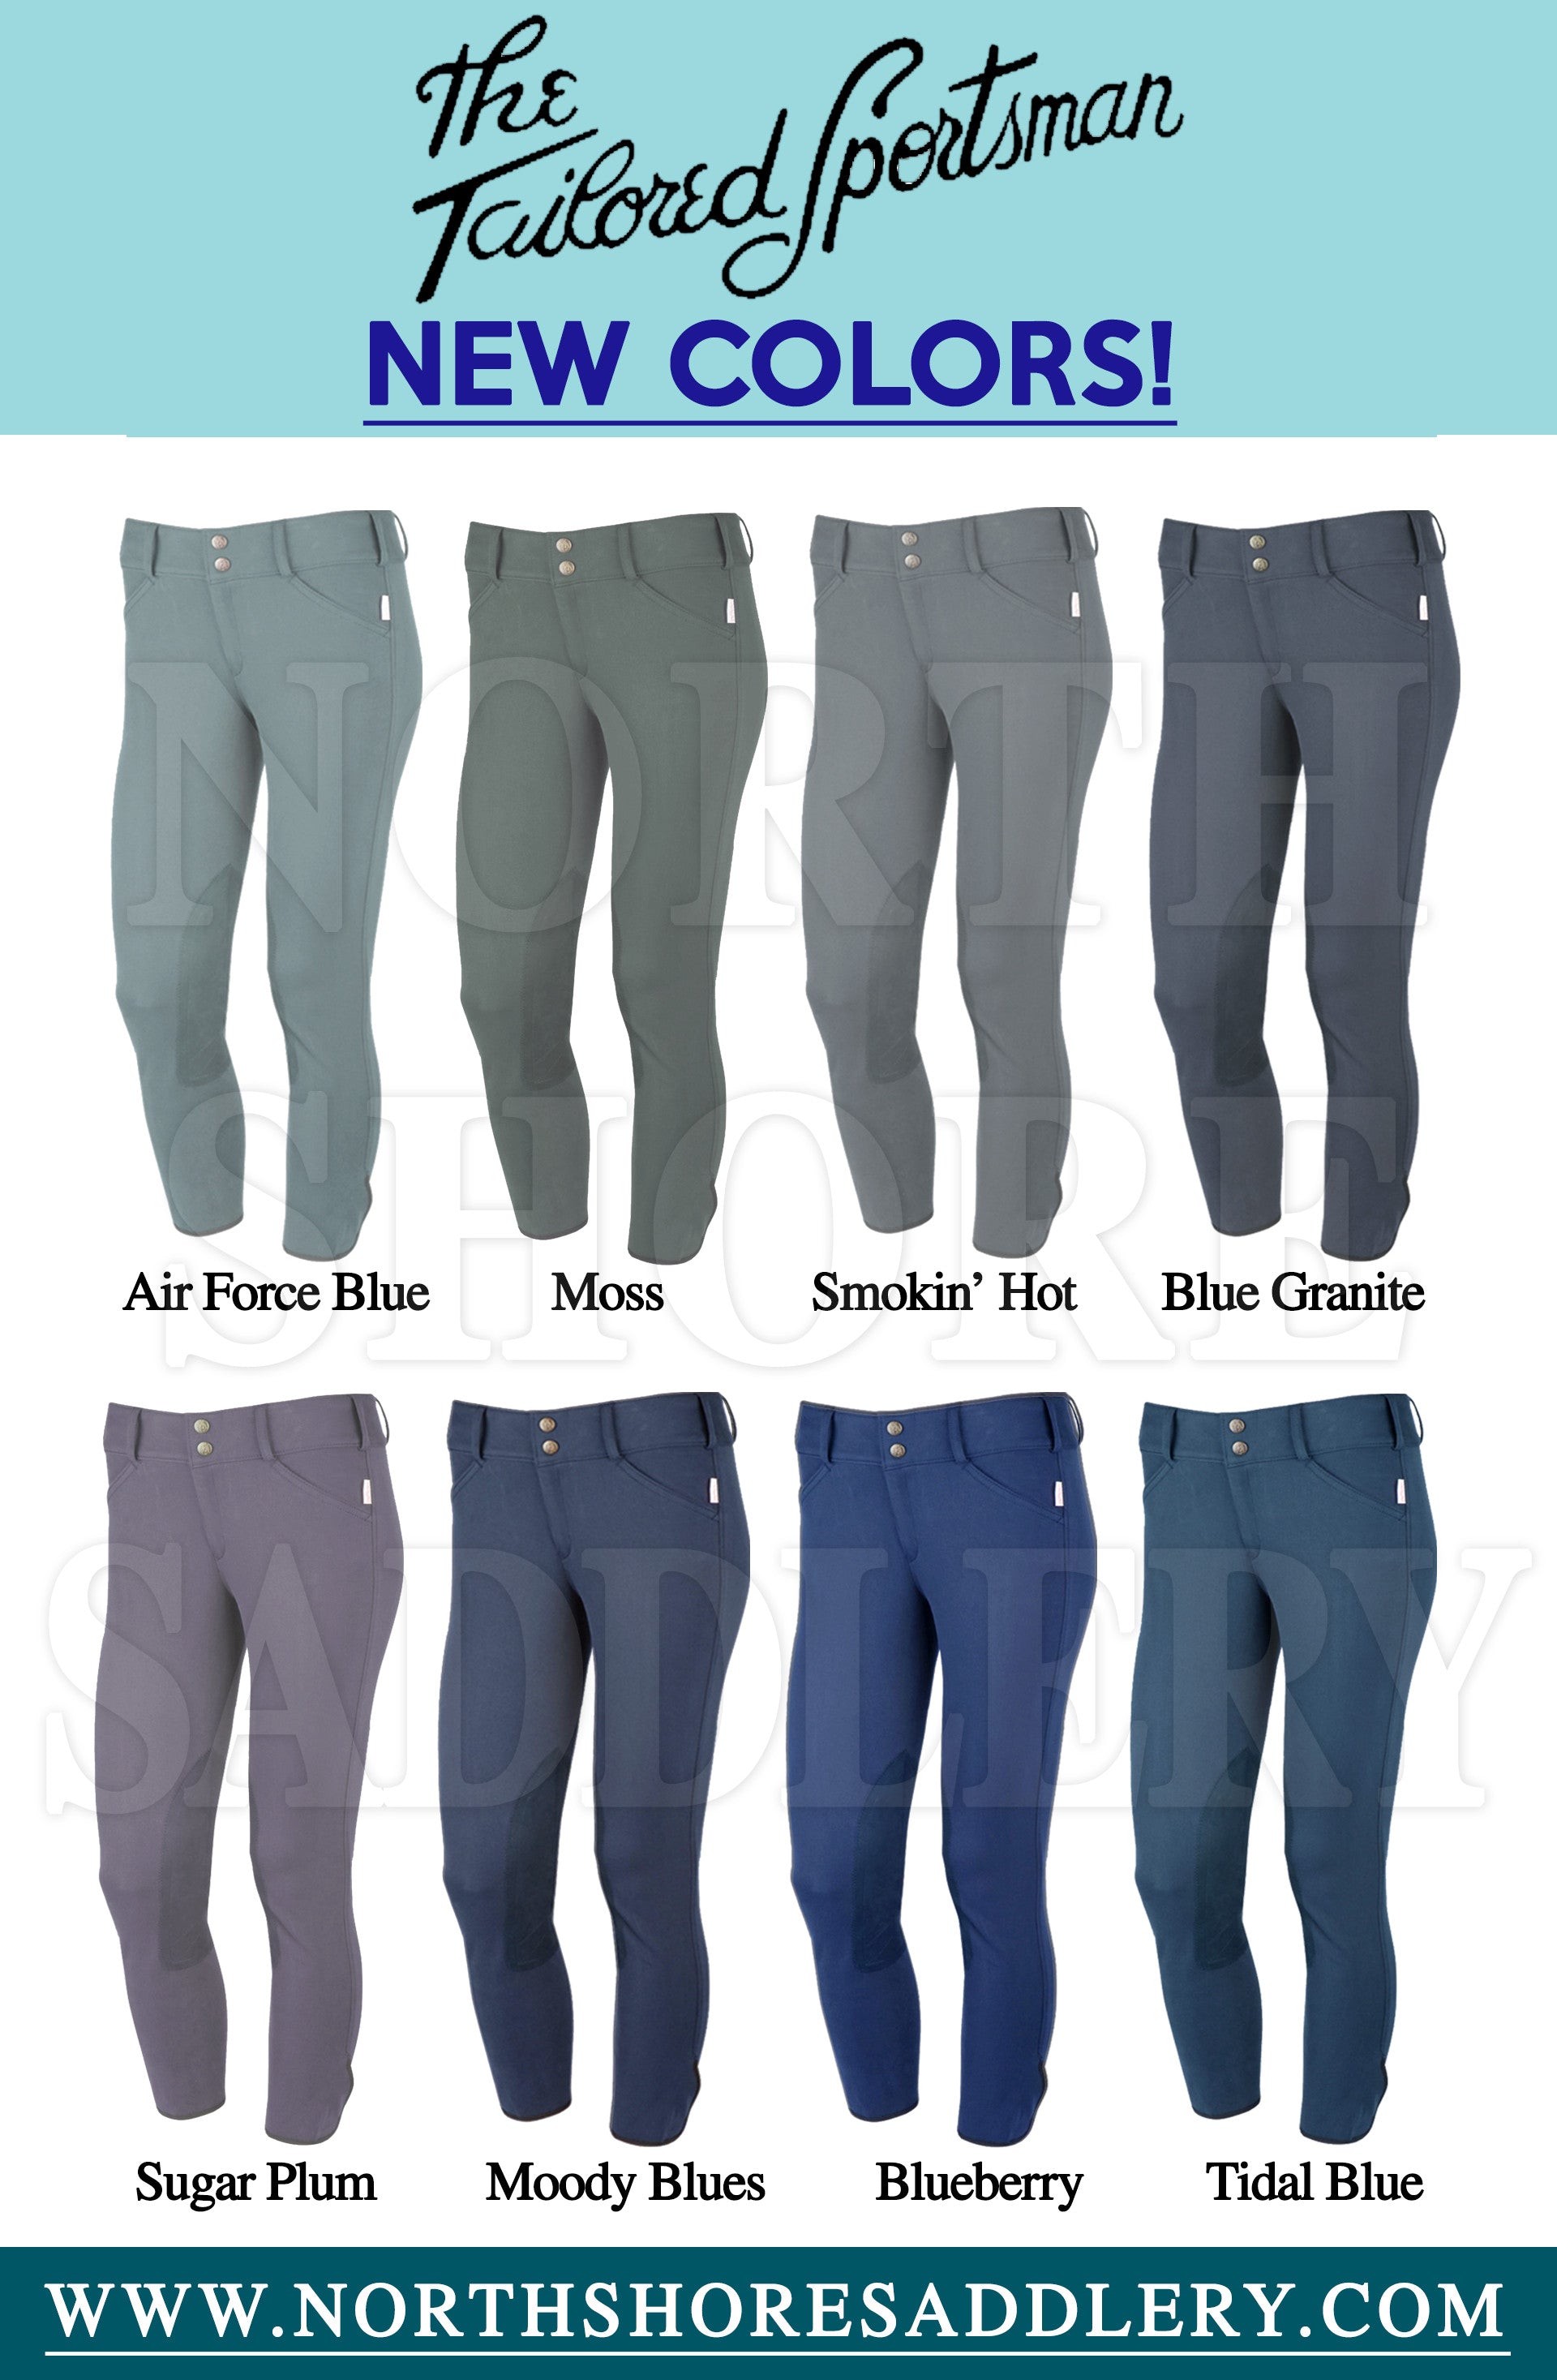 Tailored Sportsman 1967 Velco Breeches - Assorted Colors - Exceptional  Equestrian